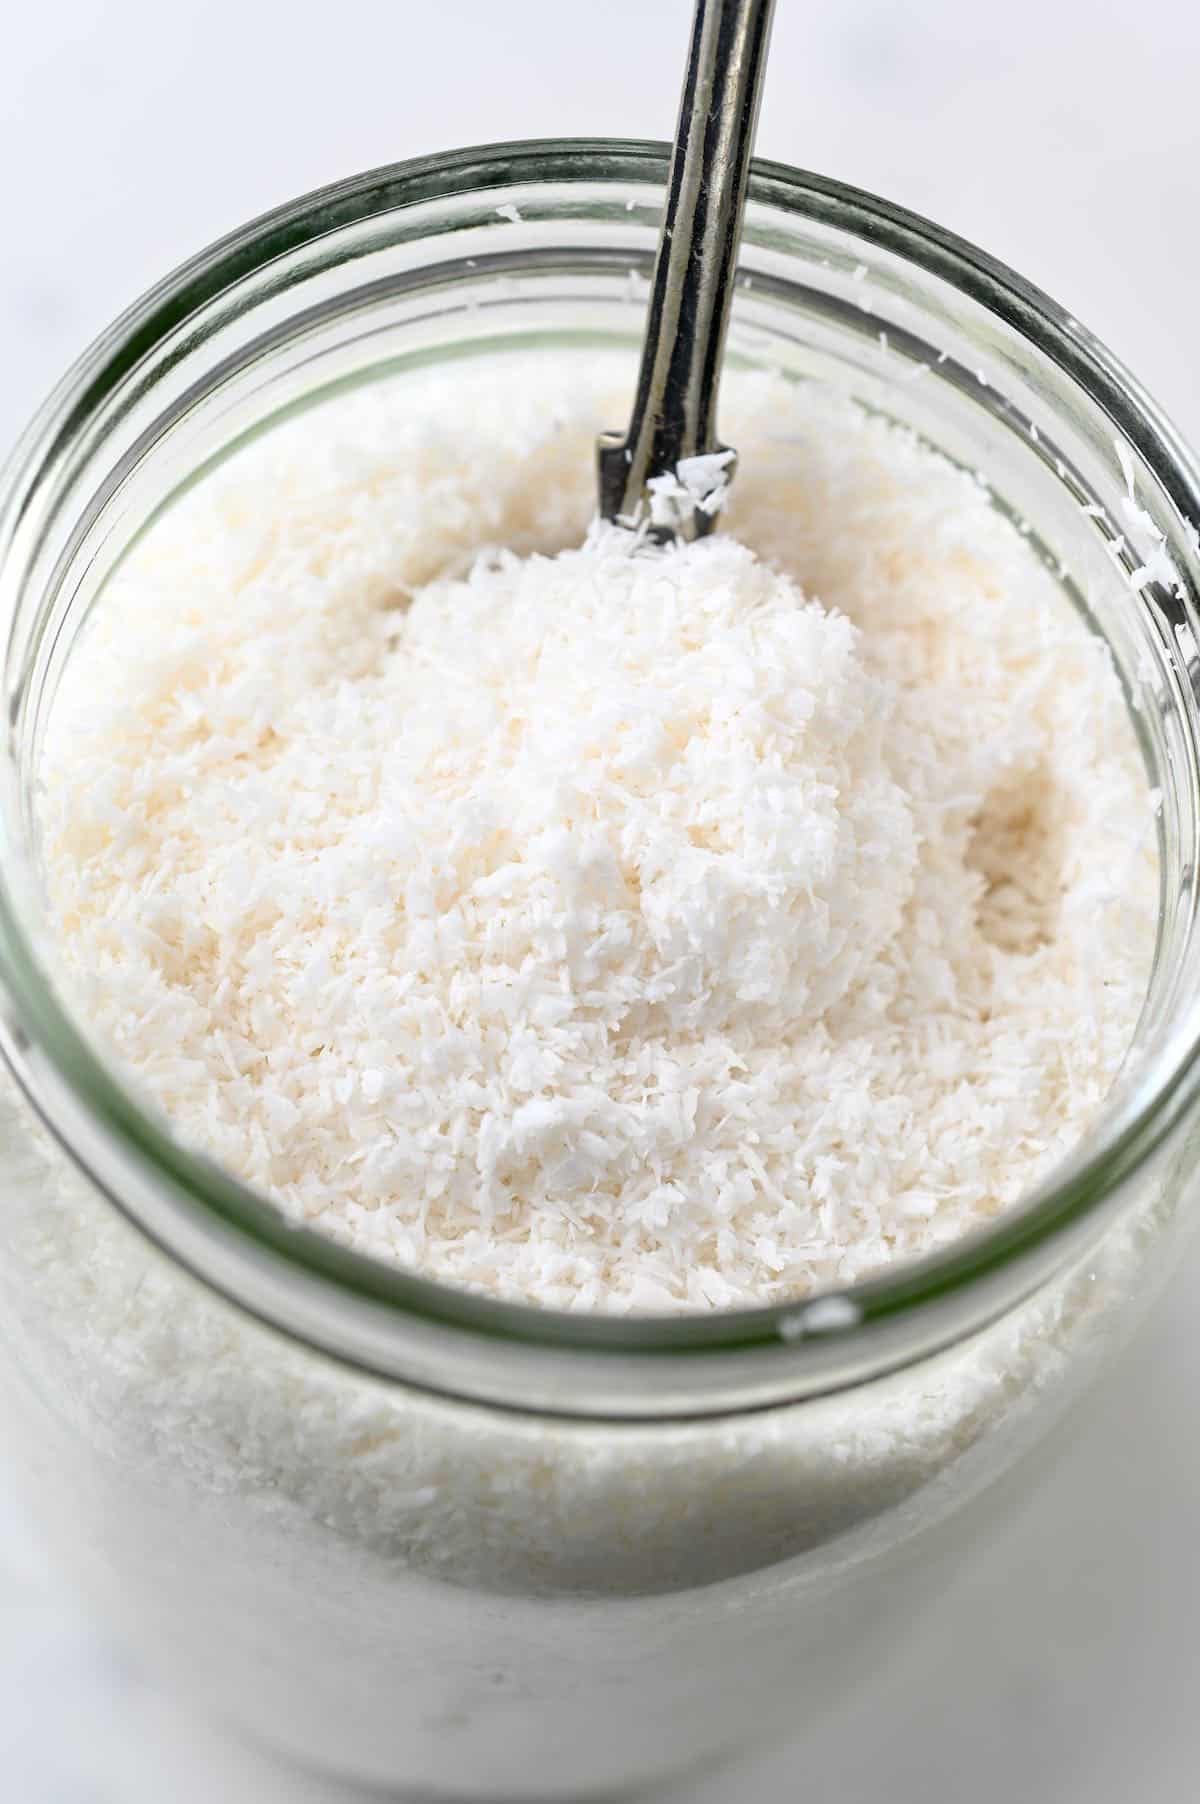 An open jar with Shredded Coconut and a spoon dipped in it